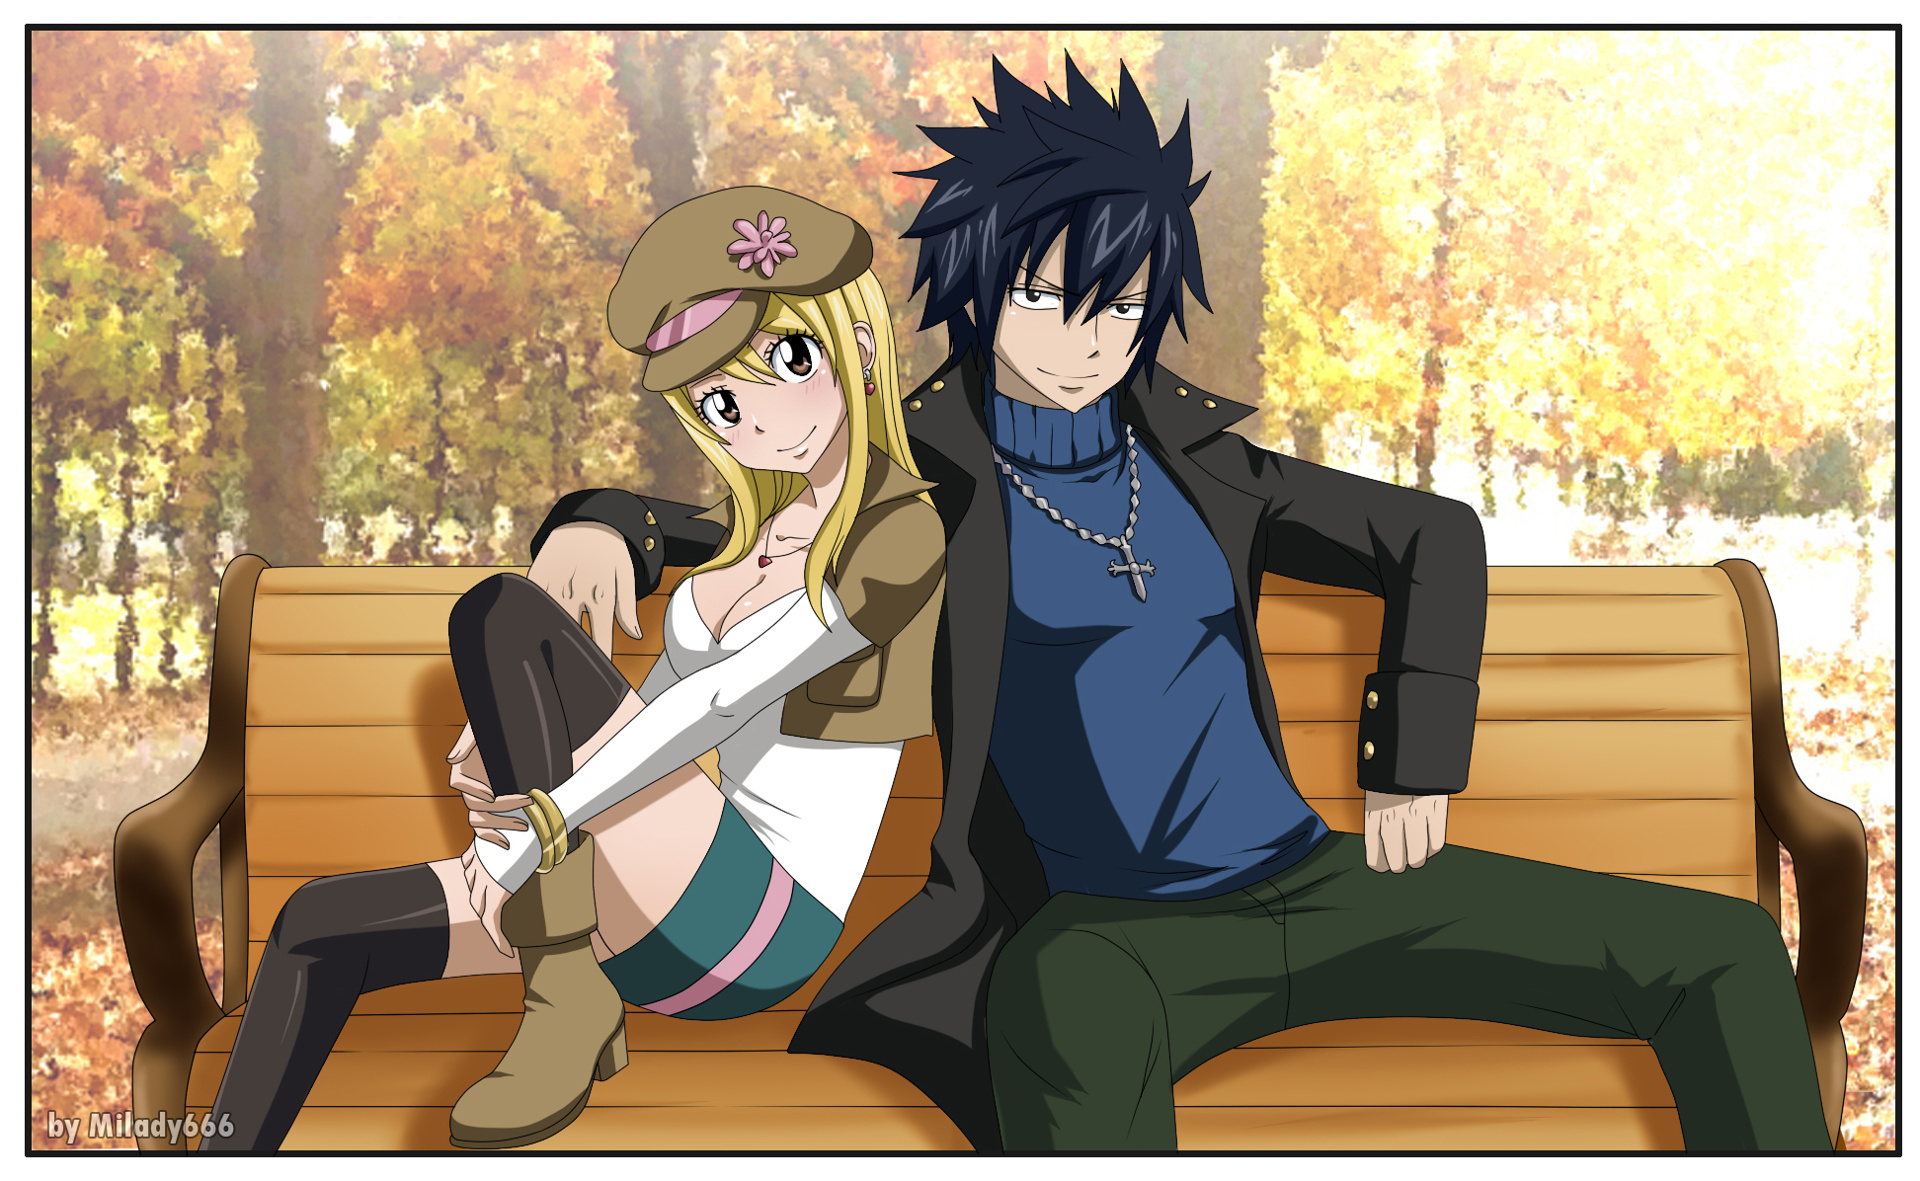 hinh nen fairy tail 3 - wallpaper free download